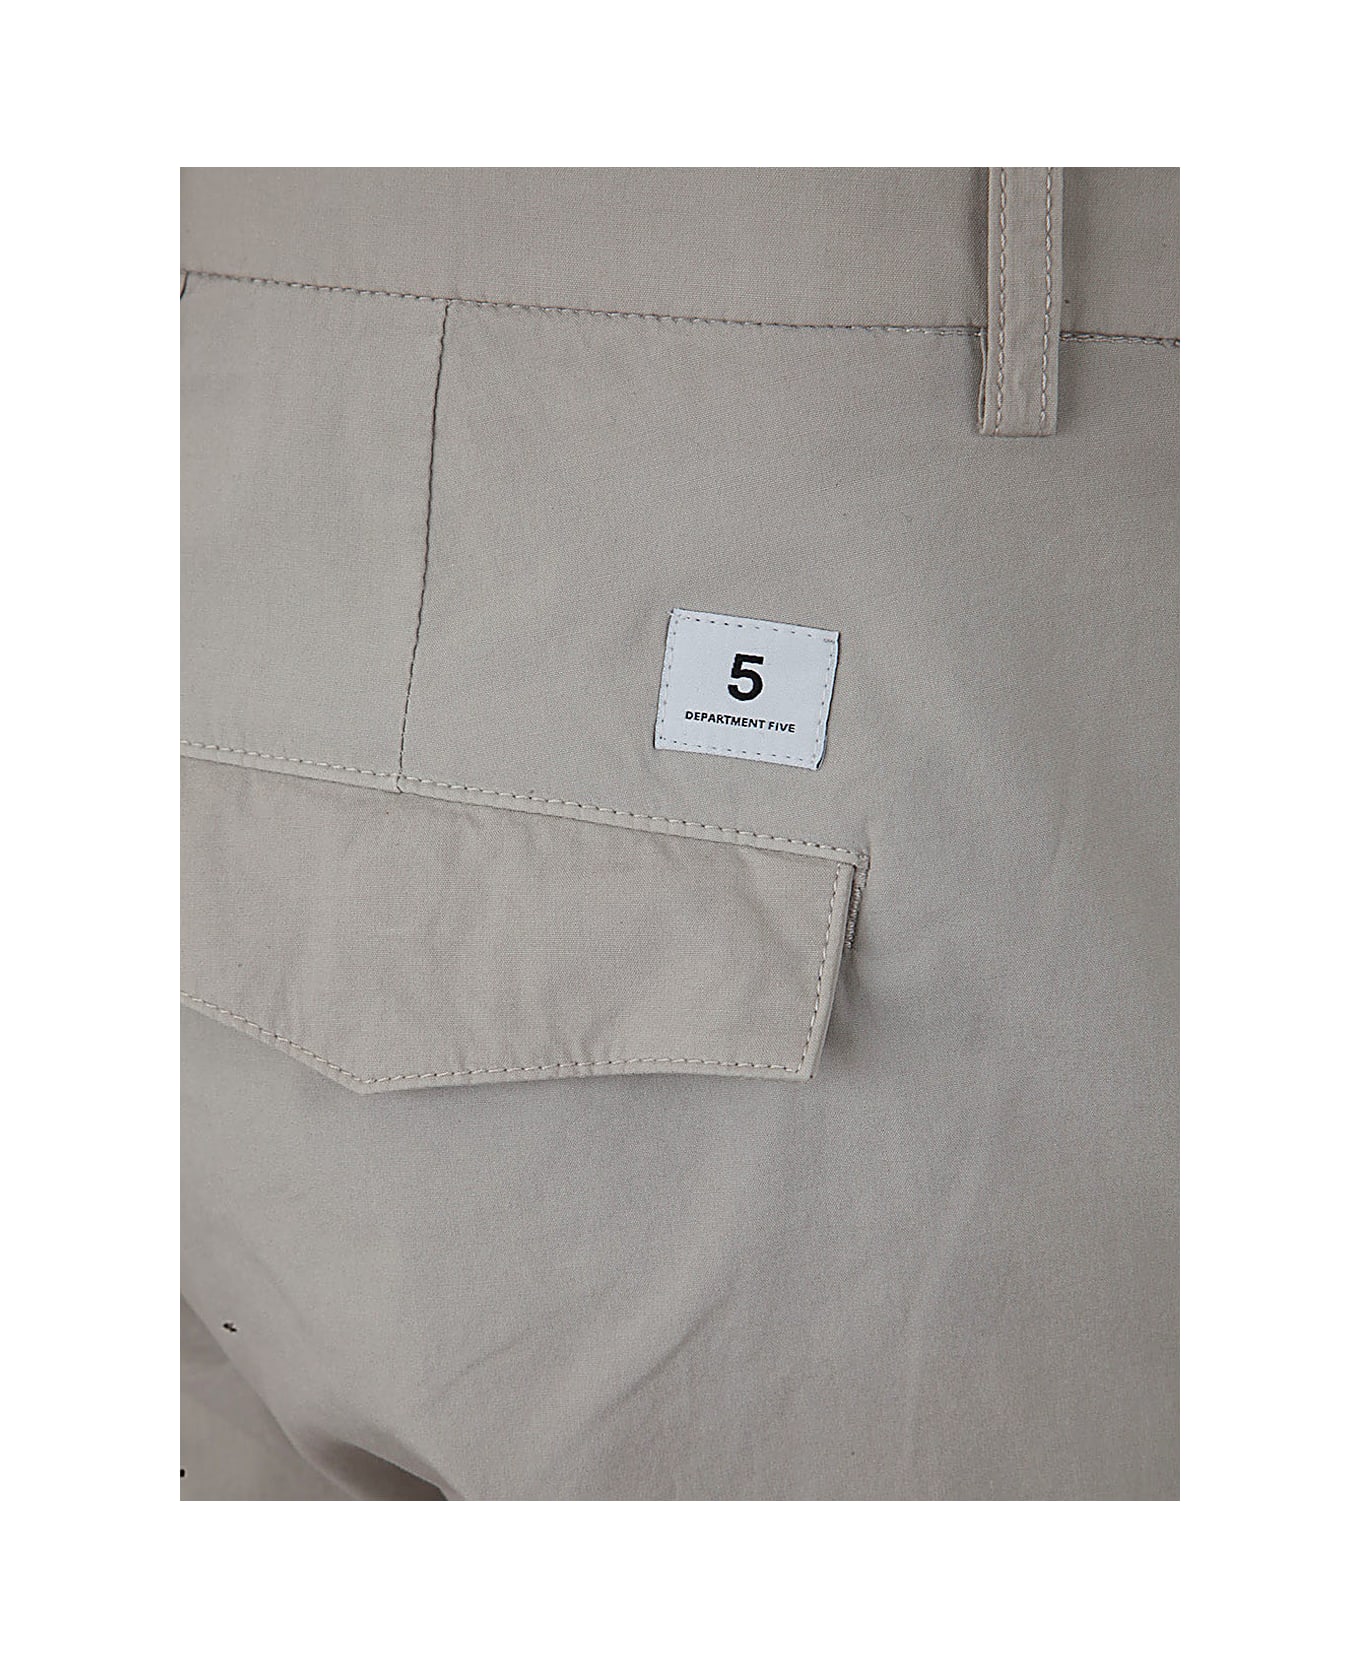 Department Five Prince Crop Chino Trousers - Stucco ボトムス